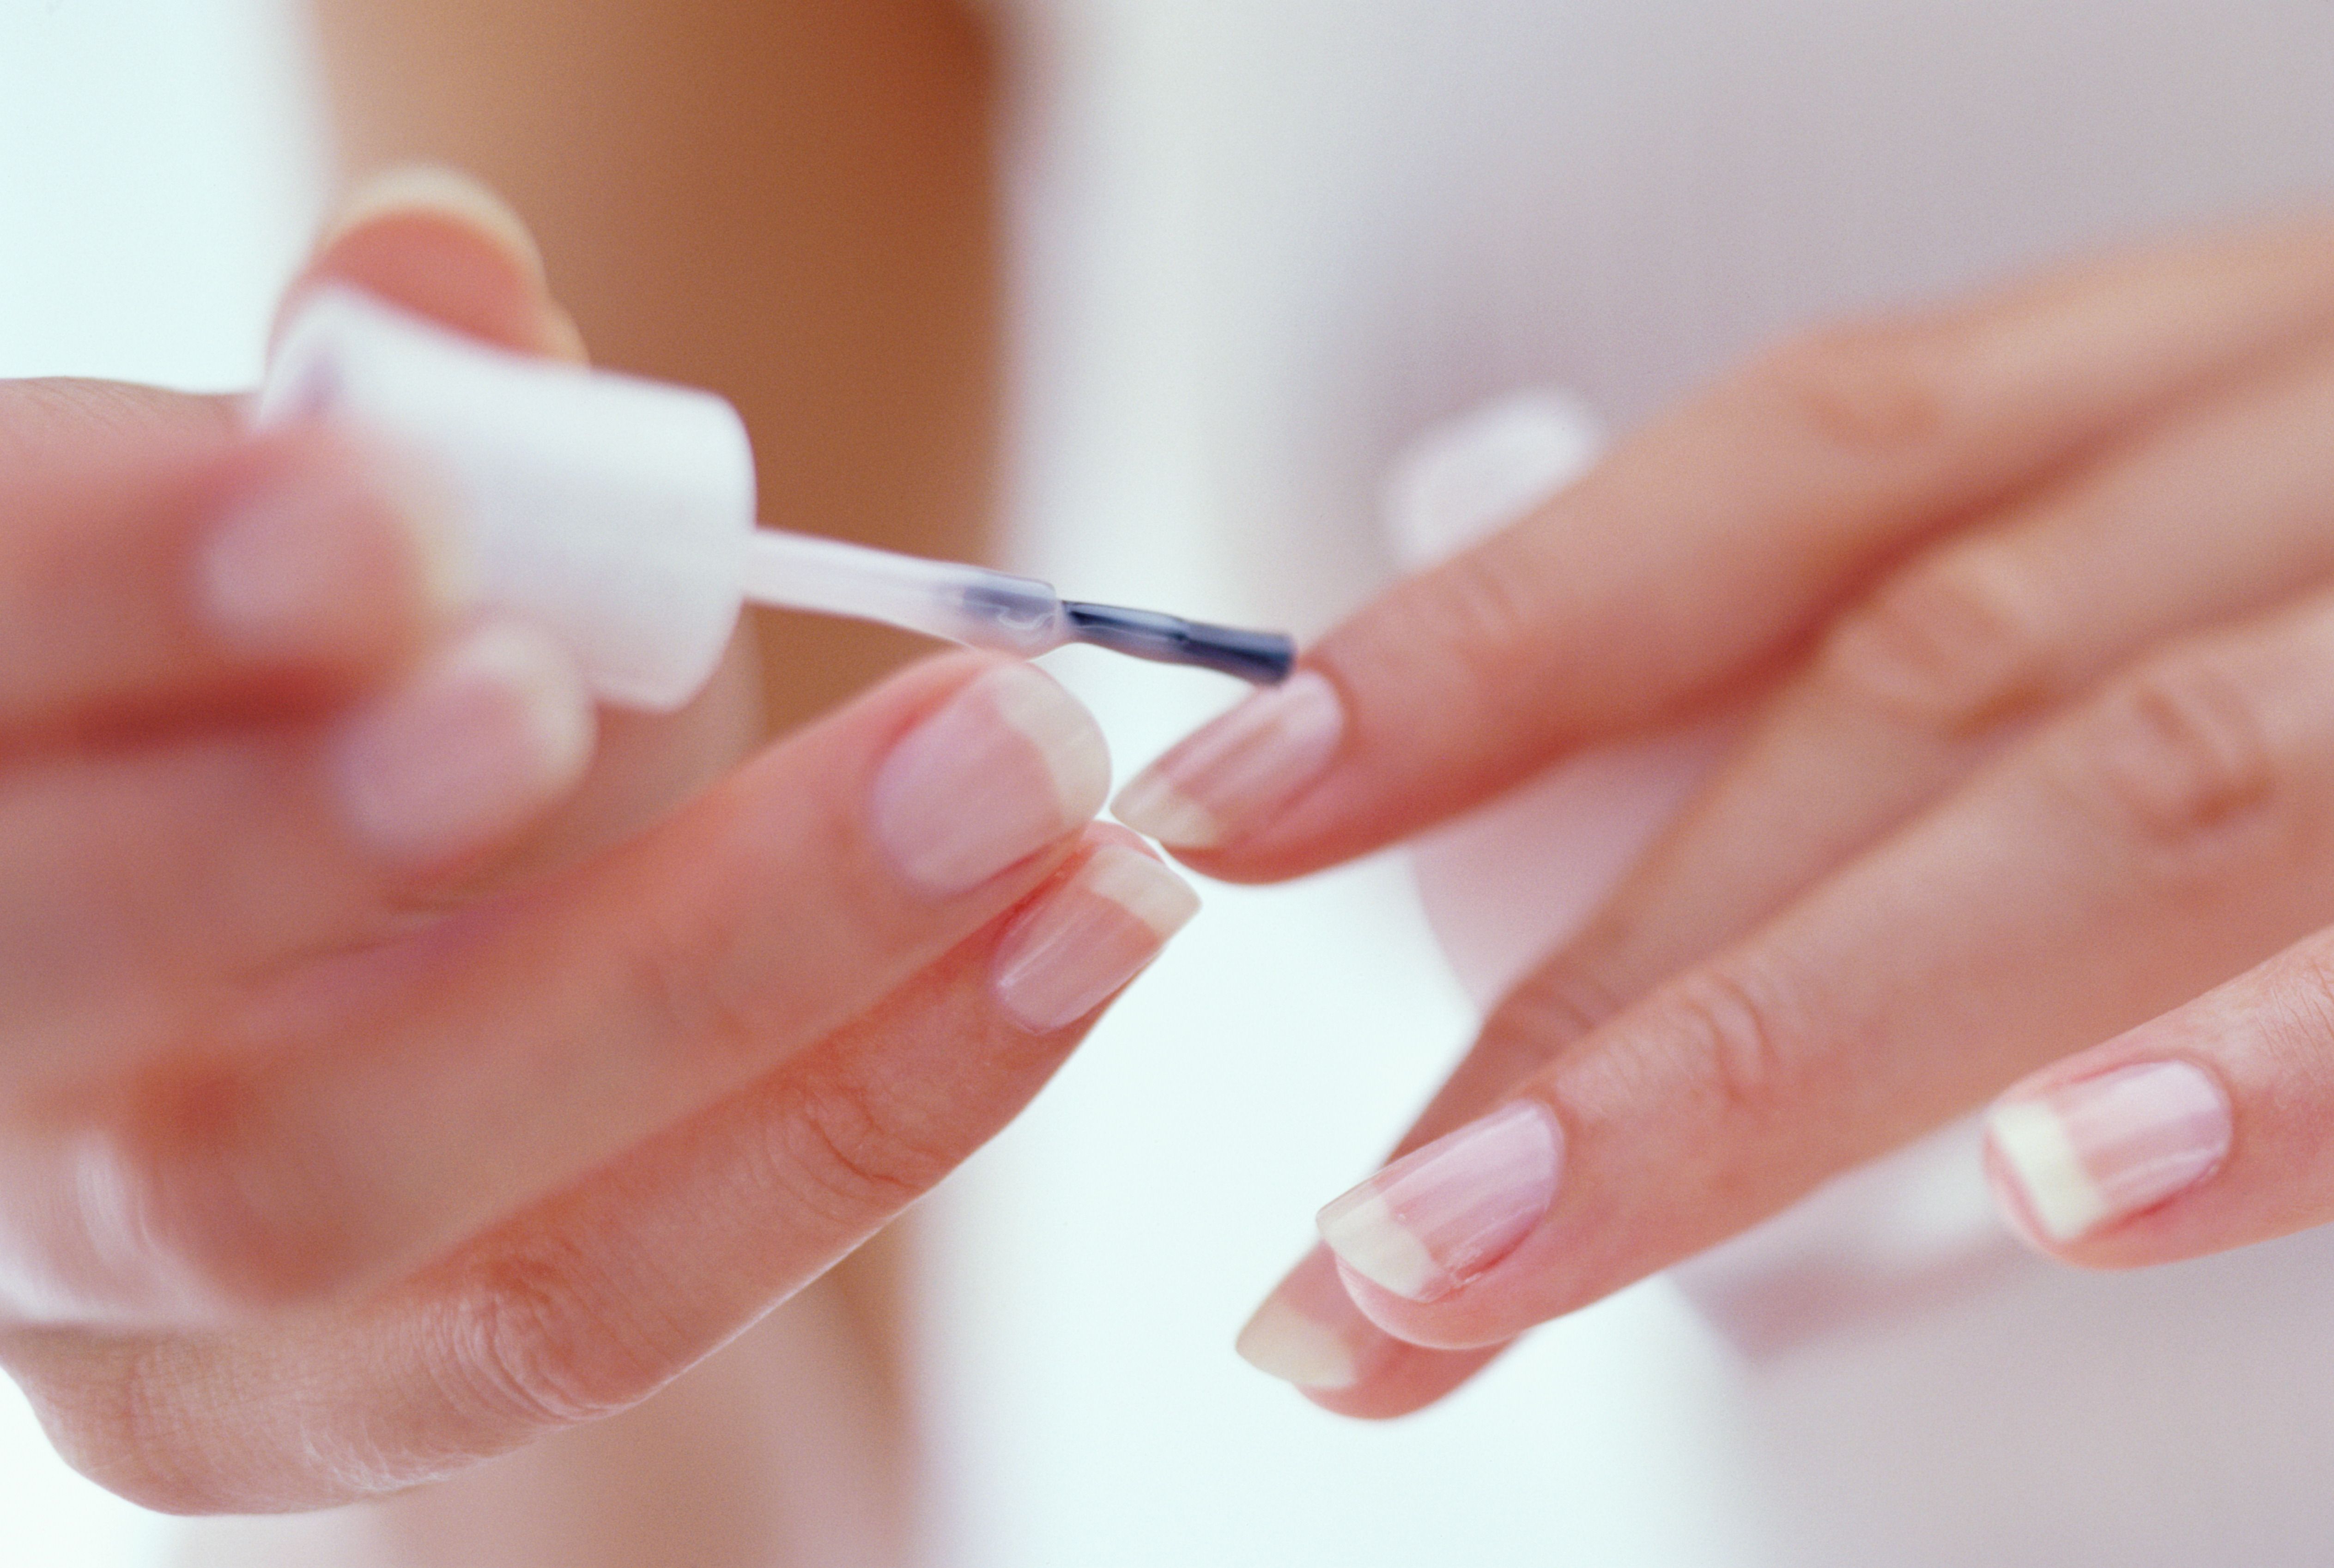 Ayurvedic Nail Analysis: What Your Nails Are Pointing to About Your Health